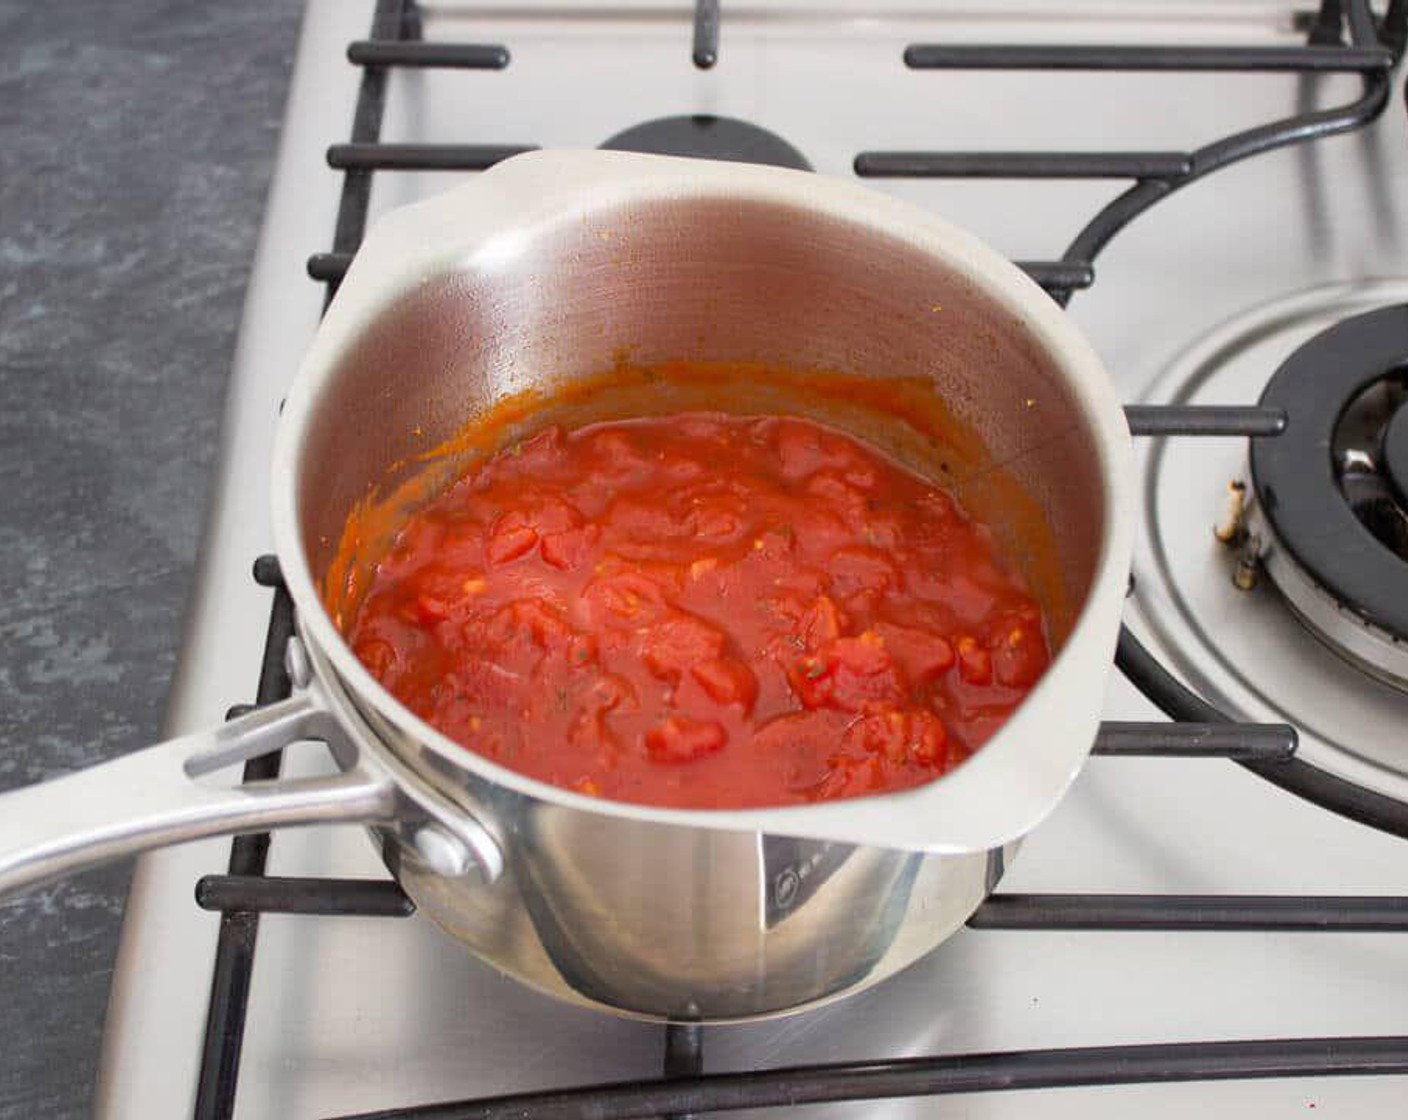 step 2 Over medium heat, fry the Garlic (1 clove) in a little Olive Oil (1/2 Tbsp) in a heavy-bottomed saucepan for a minute then add the Canned Chopped Tomatoes (2 cups).